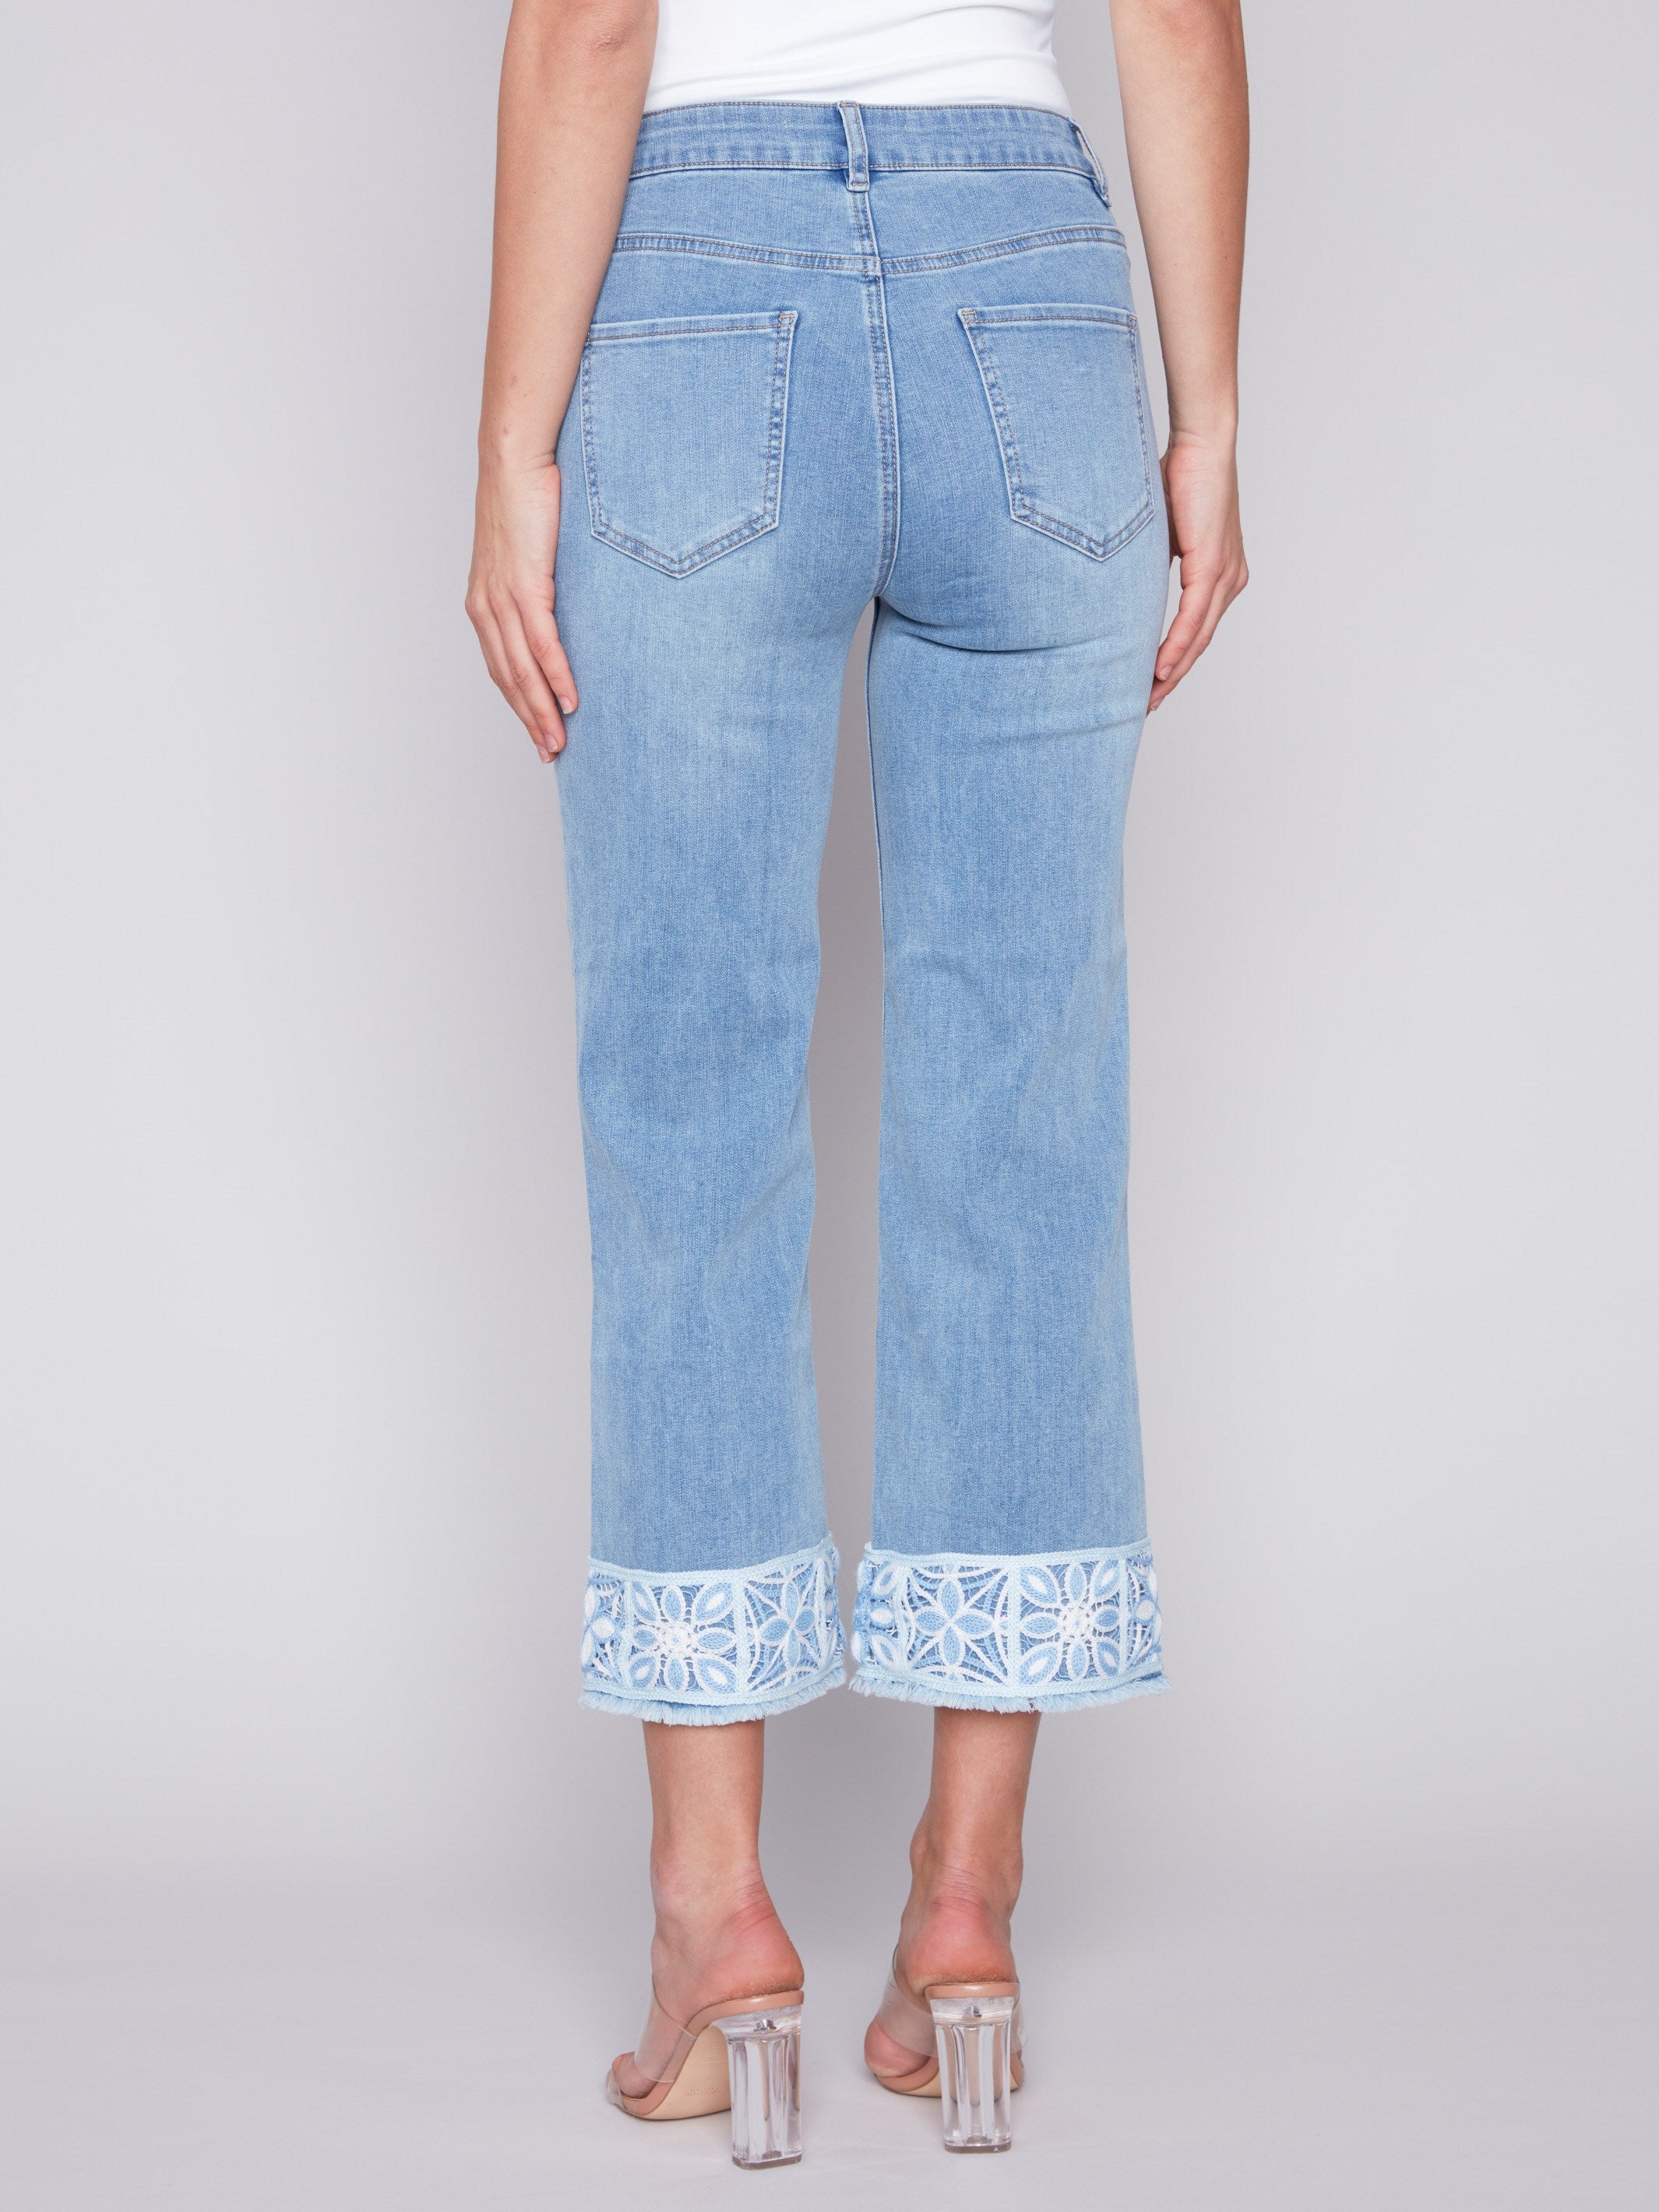 Jeans with Crochet Cuff - Light Blue - Charlie B Collection Canada - Image 3